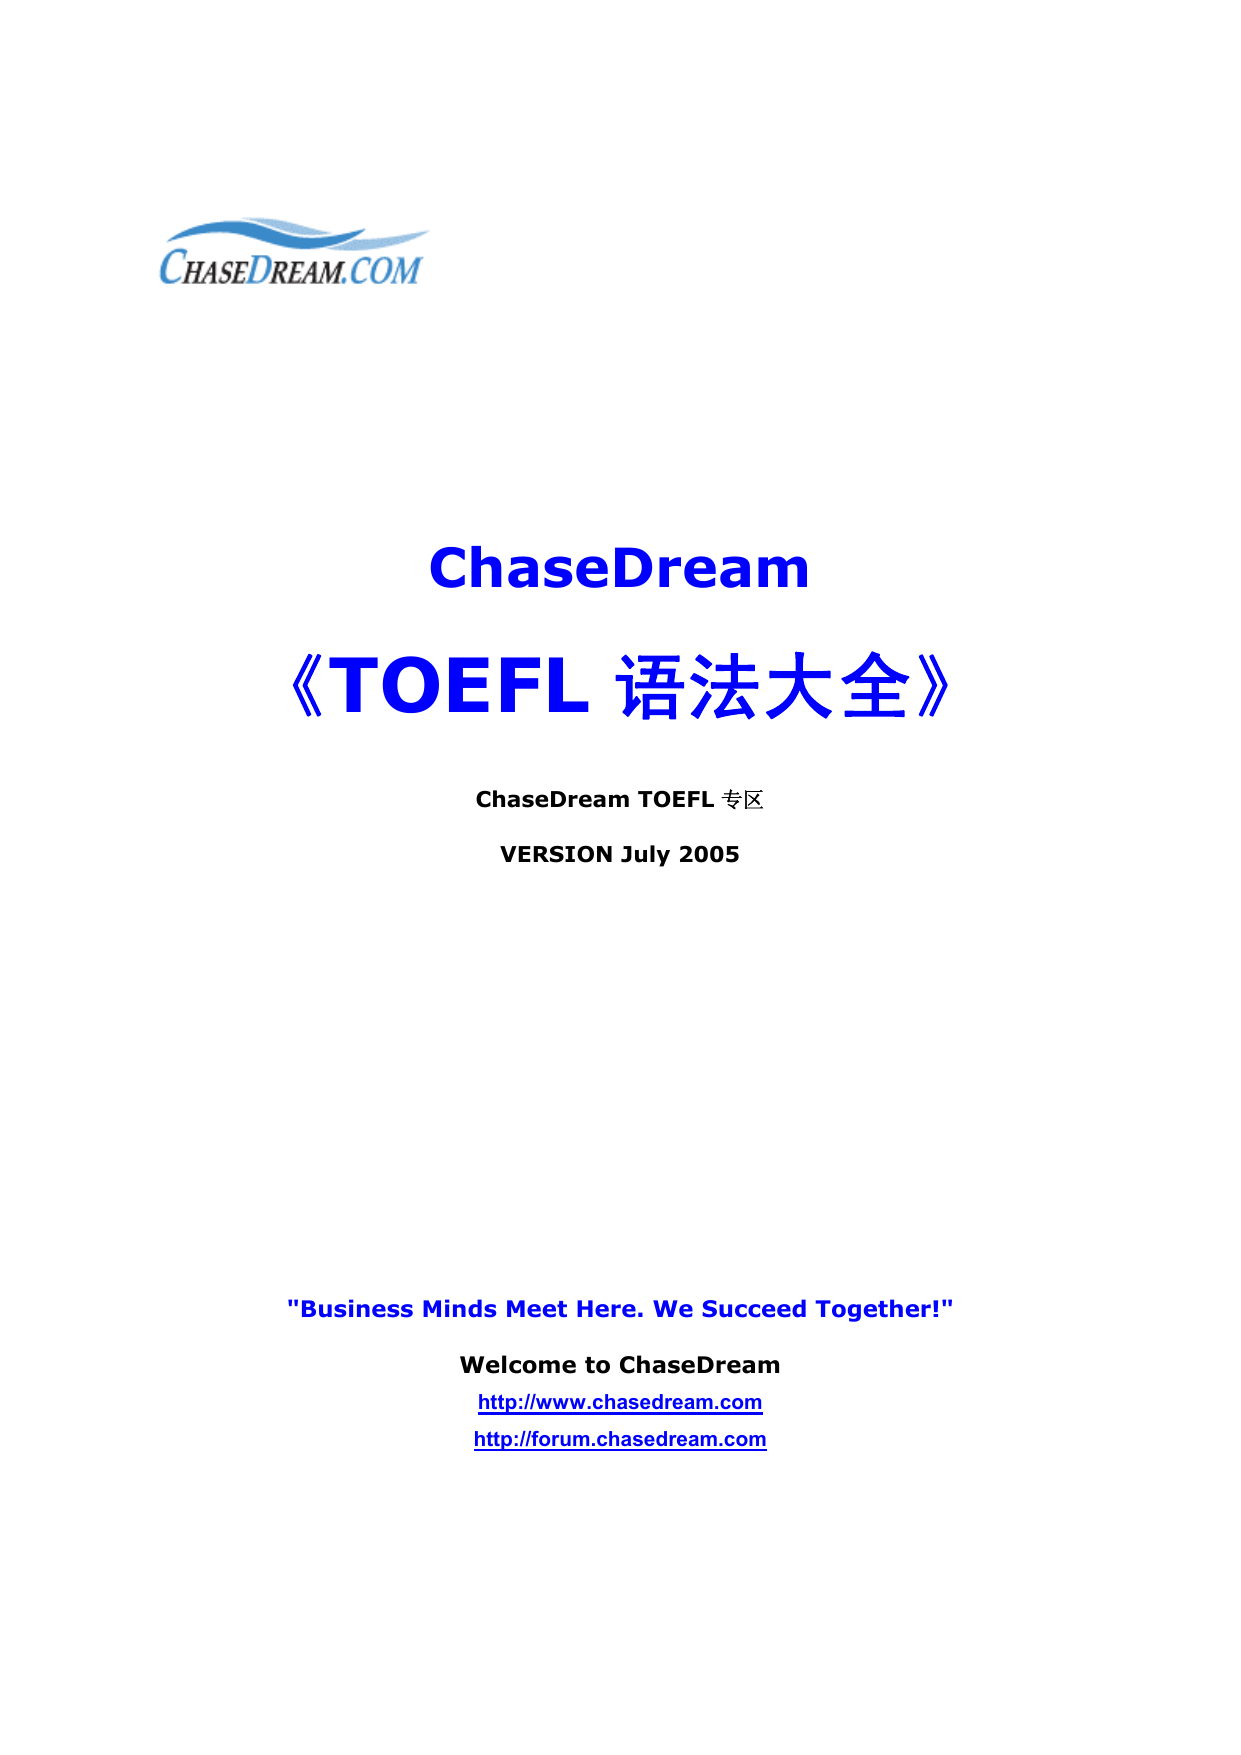 Toefl Structure Chasedream V 05 07 Shown Explanation